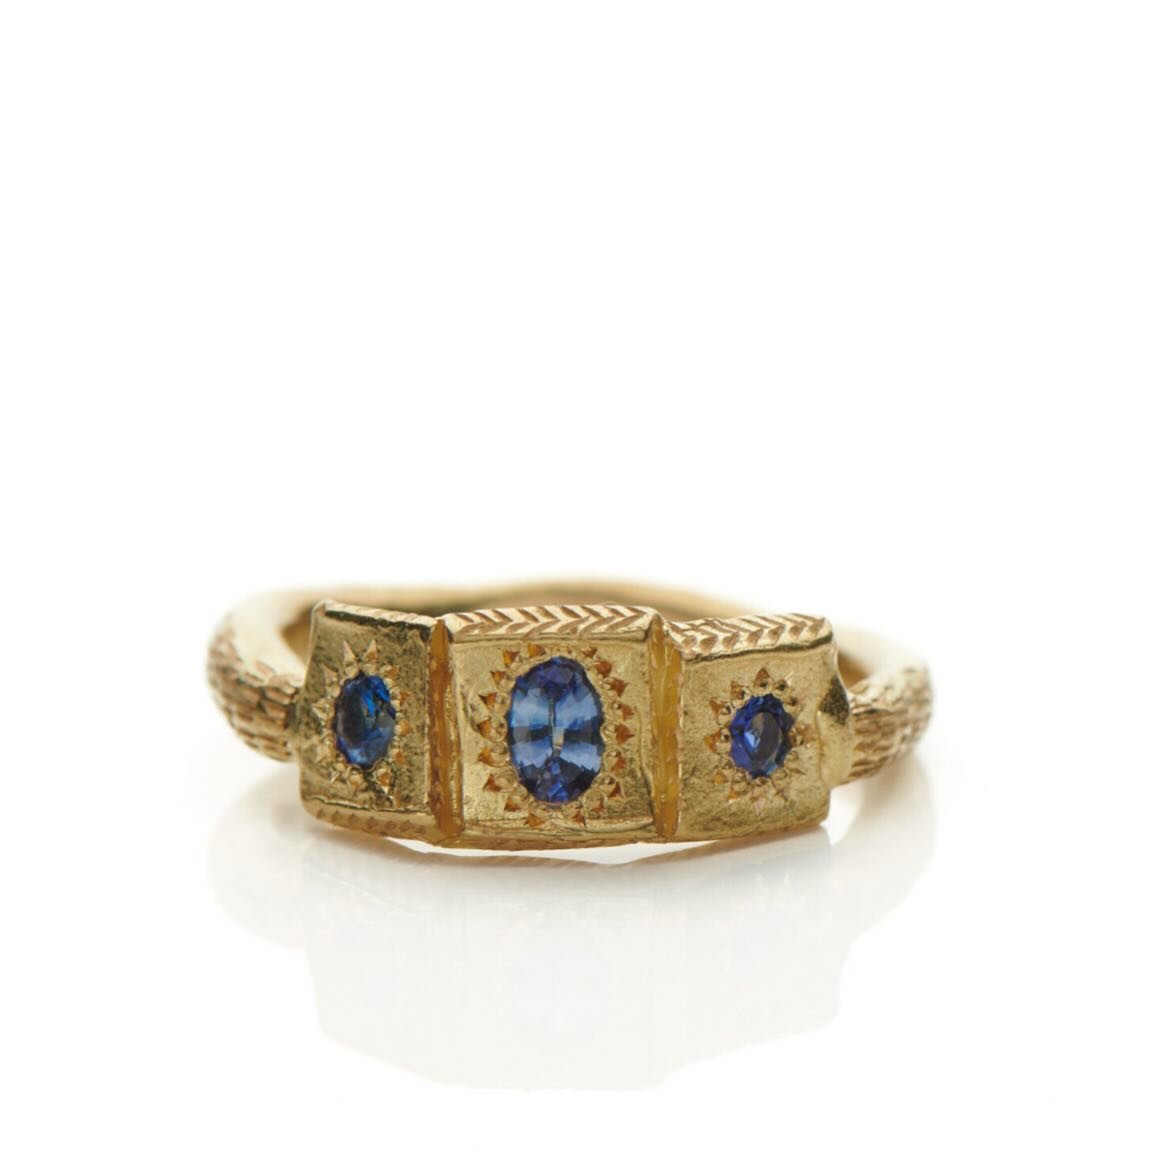 18ct Caravel ring set with Ceylon sapphires.

This ring was made initially for my Mum. Three is an important number in my family, as I am one of three children. My Mum asked for a ring that had three gemstones in it to represent us. 
At the time I wa